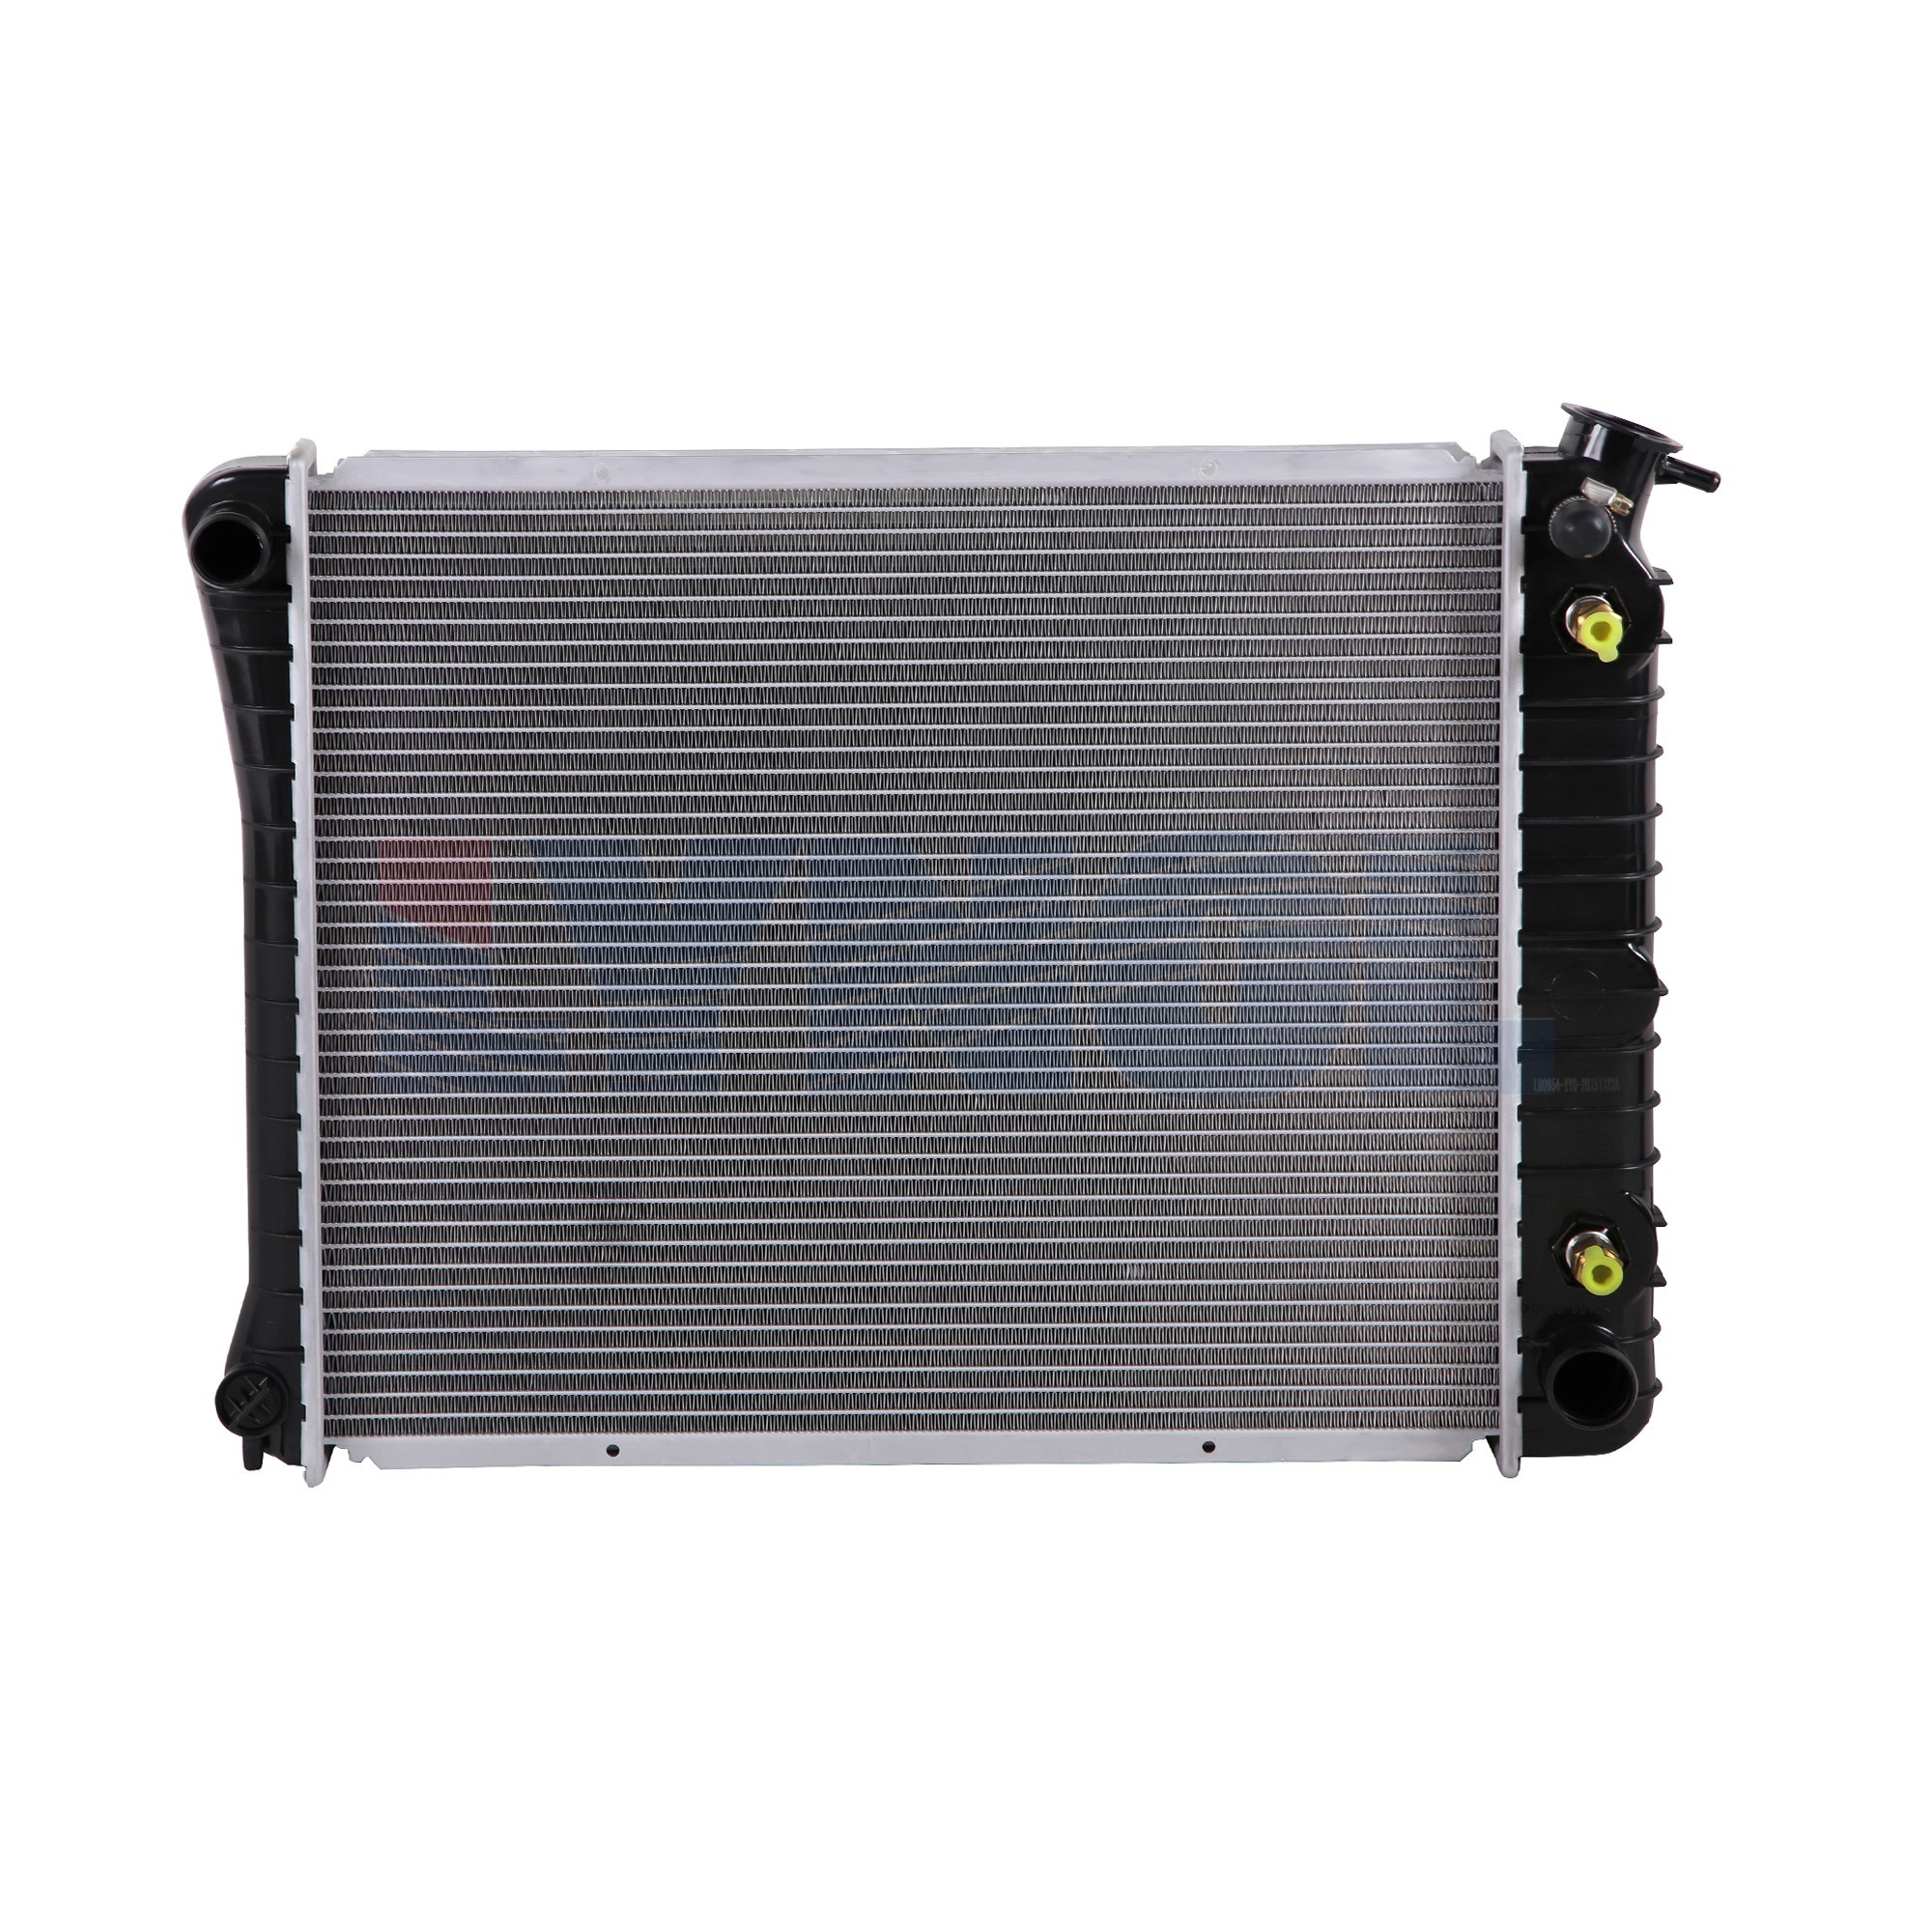 LR0569 - RADIATOR  - SUPERCEDED TO LR0954; LR0569 IS 2 ROWS, LR0571 IS 3 ROWS